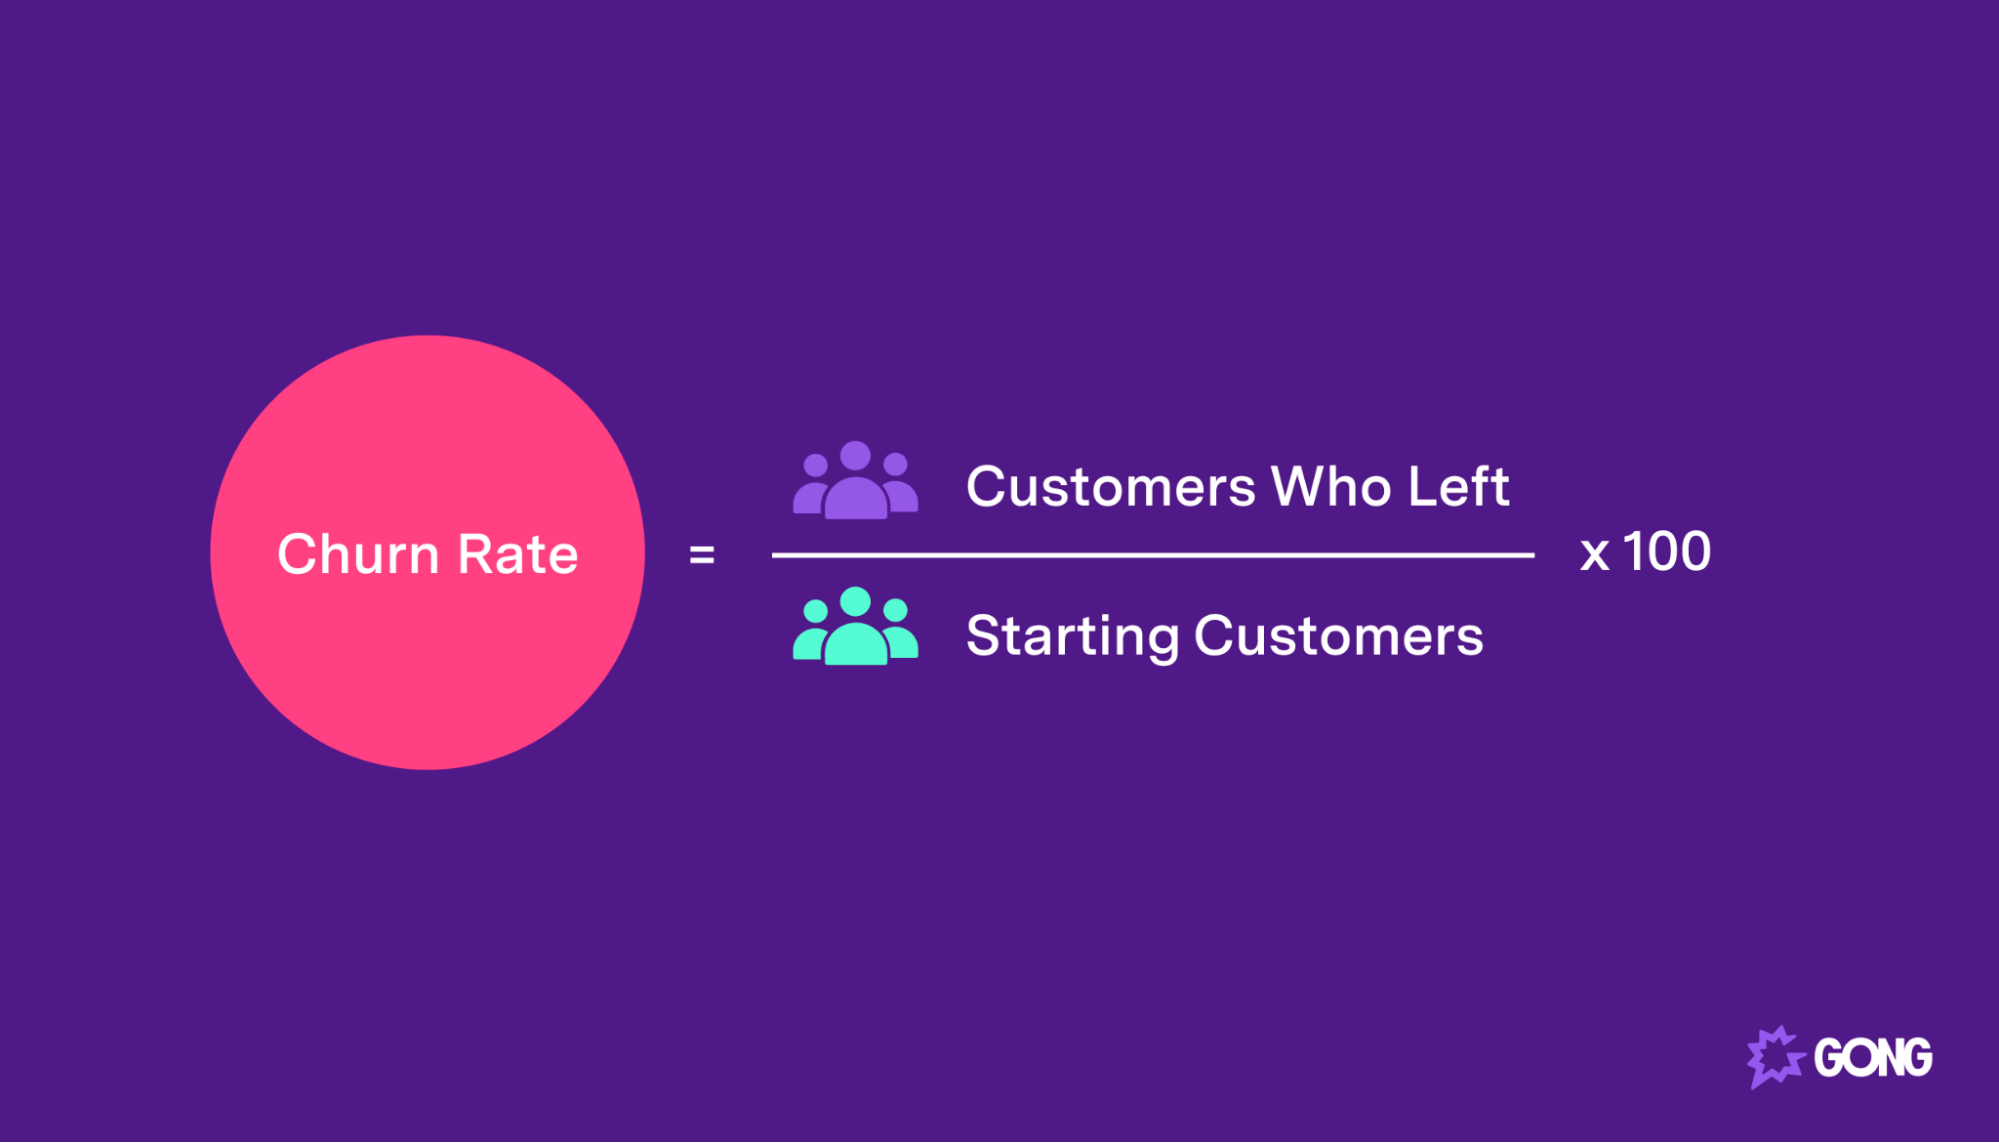 Churn rate = customers who left / starting customers x 100